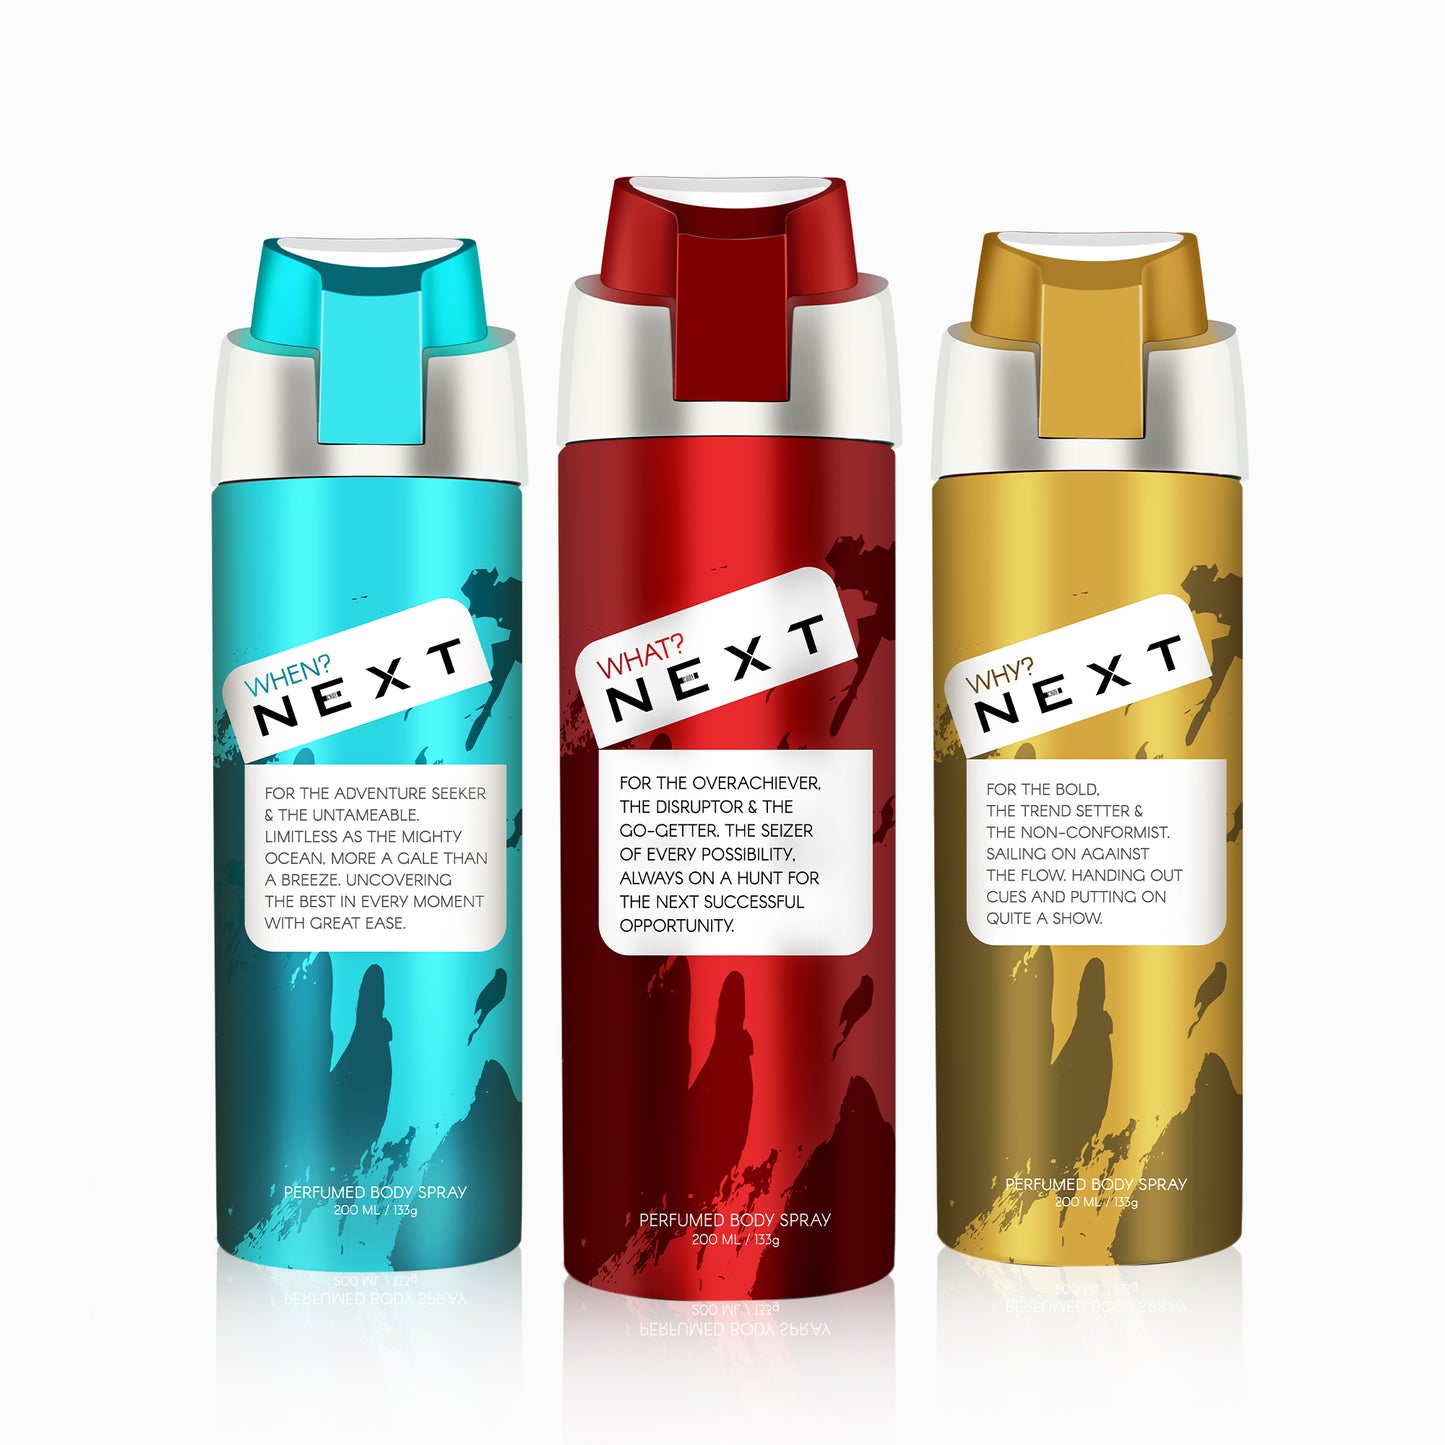 Set of 3 Deodorants - Each 200ml - NEXT WHAT? WHEN? WHY?